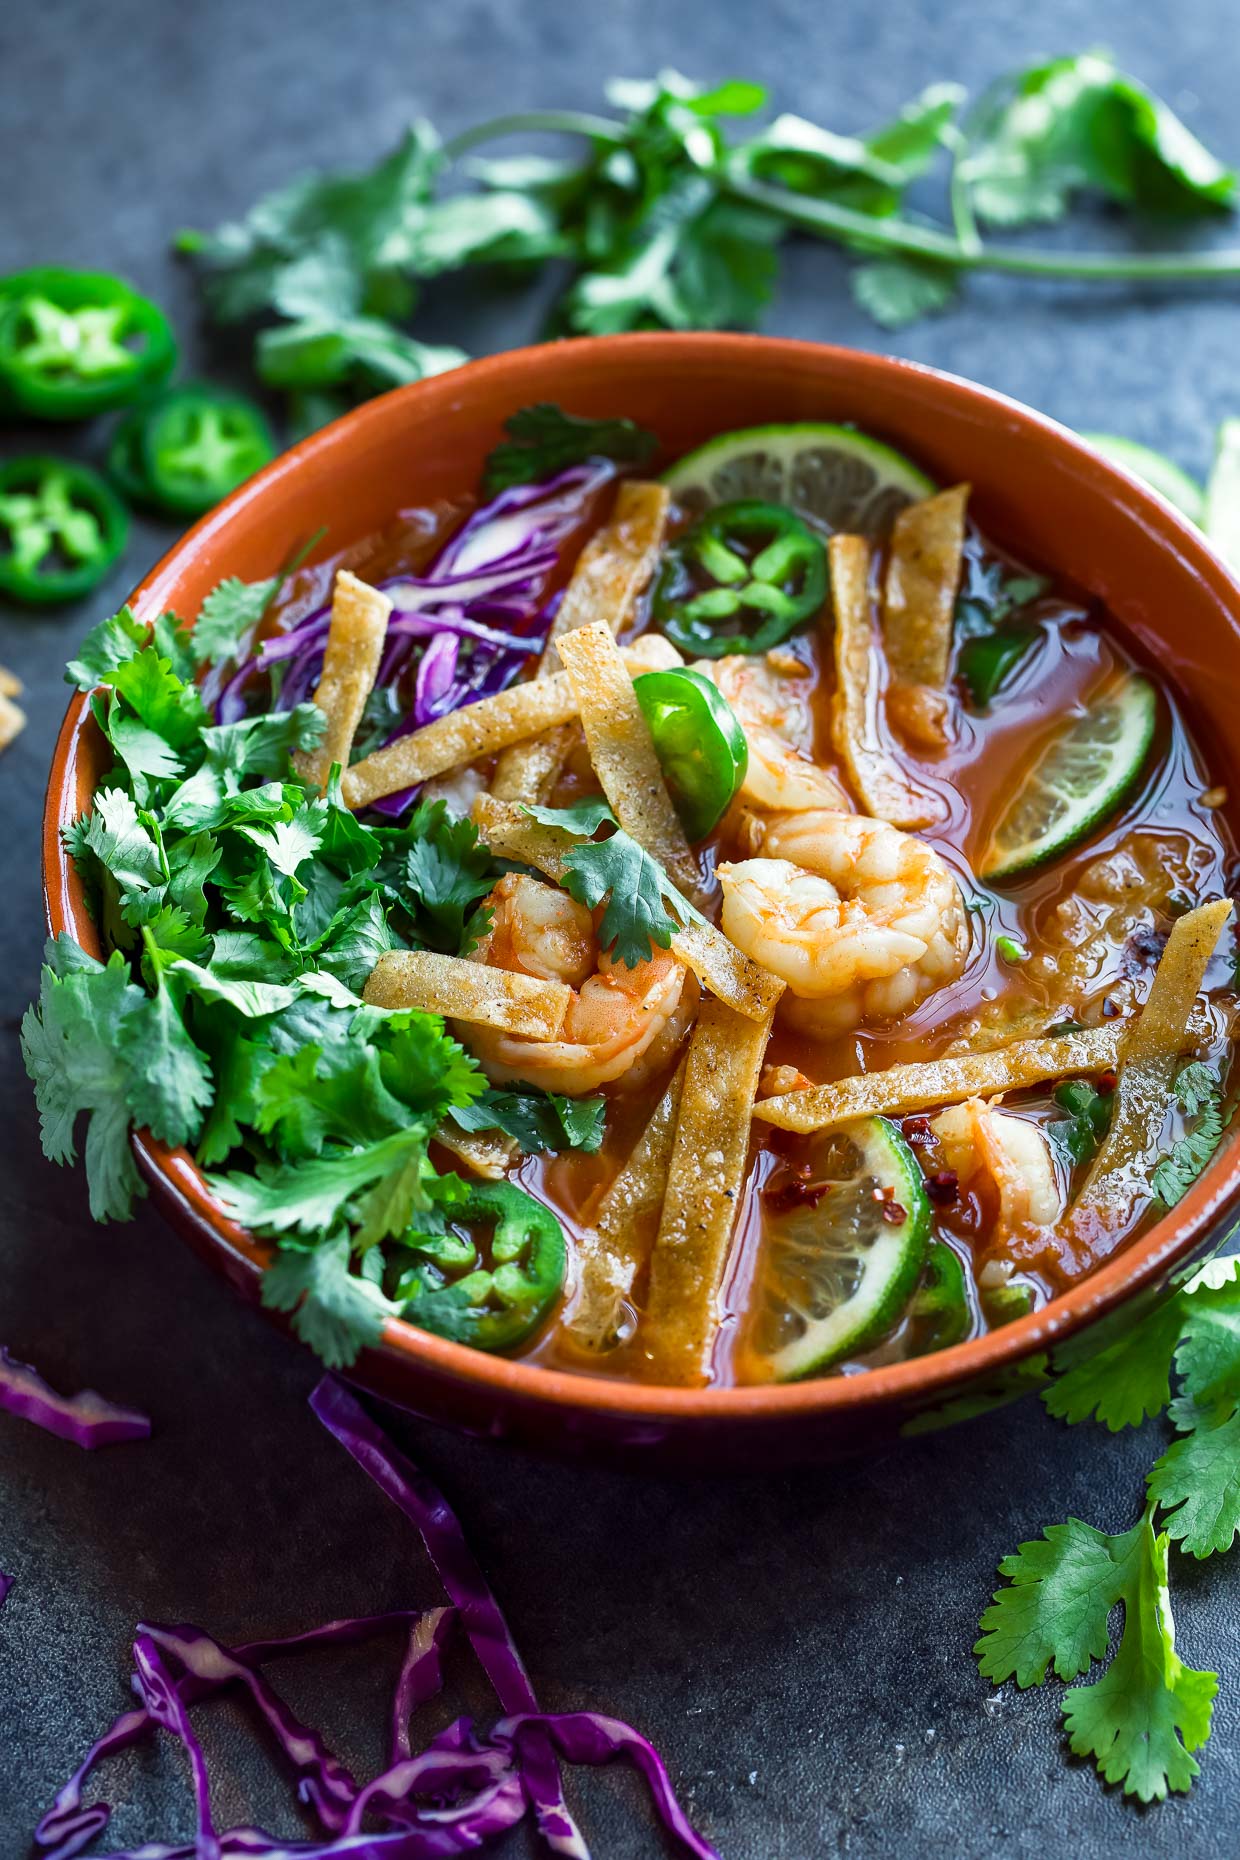 Orange terracotta bowl of shrimp and tortilla soup topped with shredded purple cabbage and chopped green cilantro.